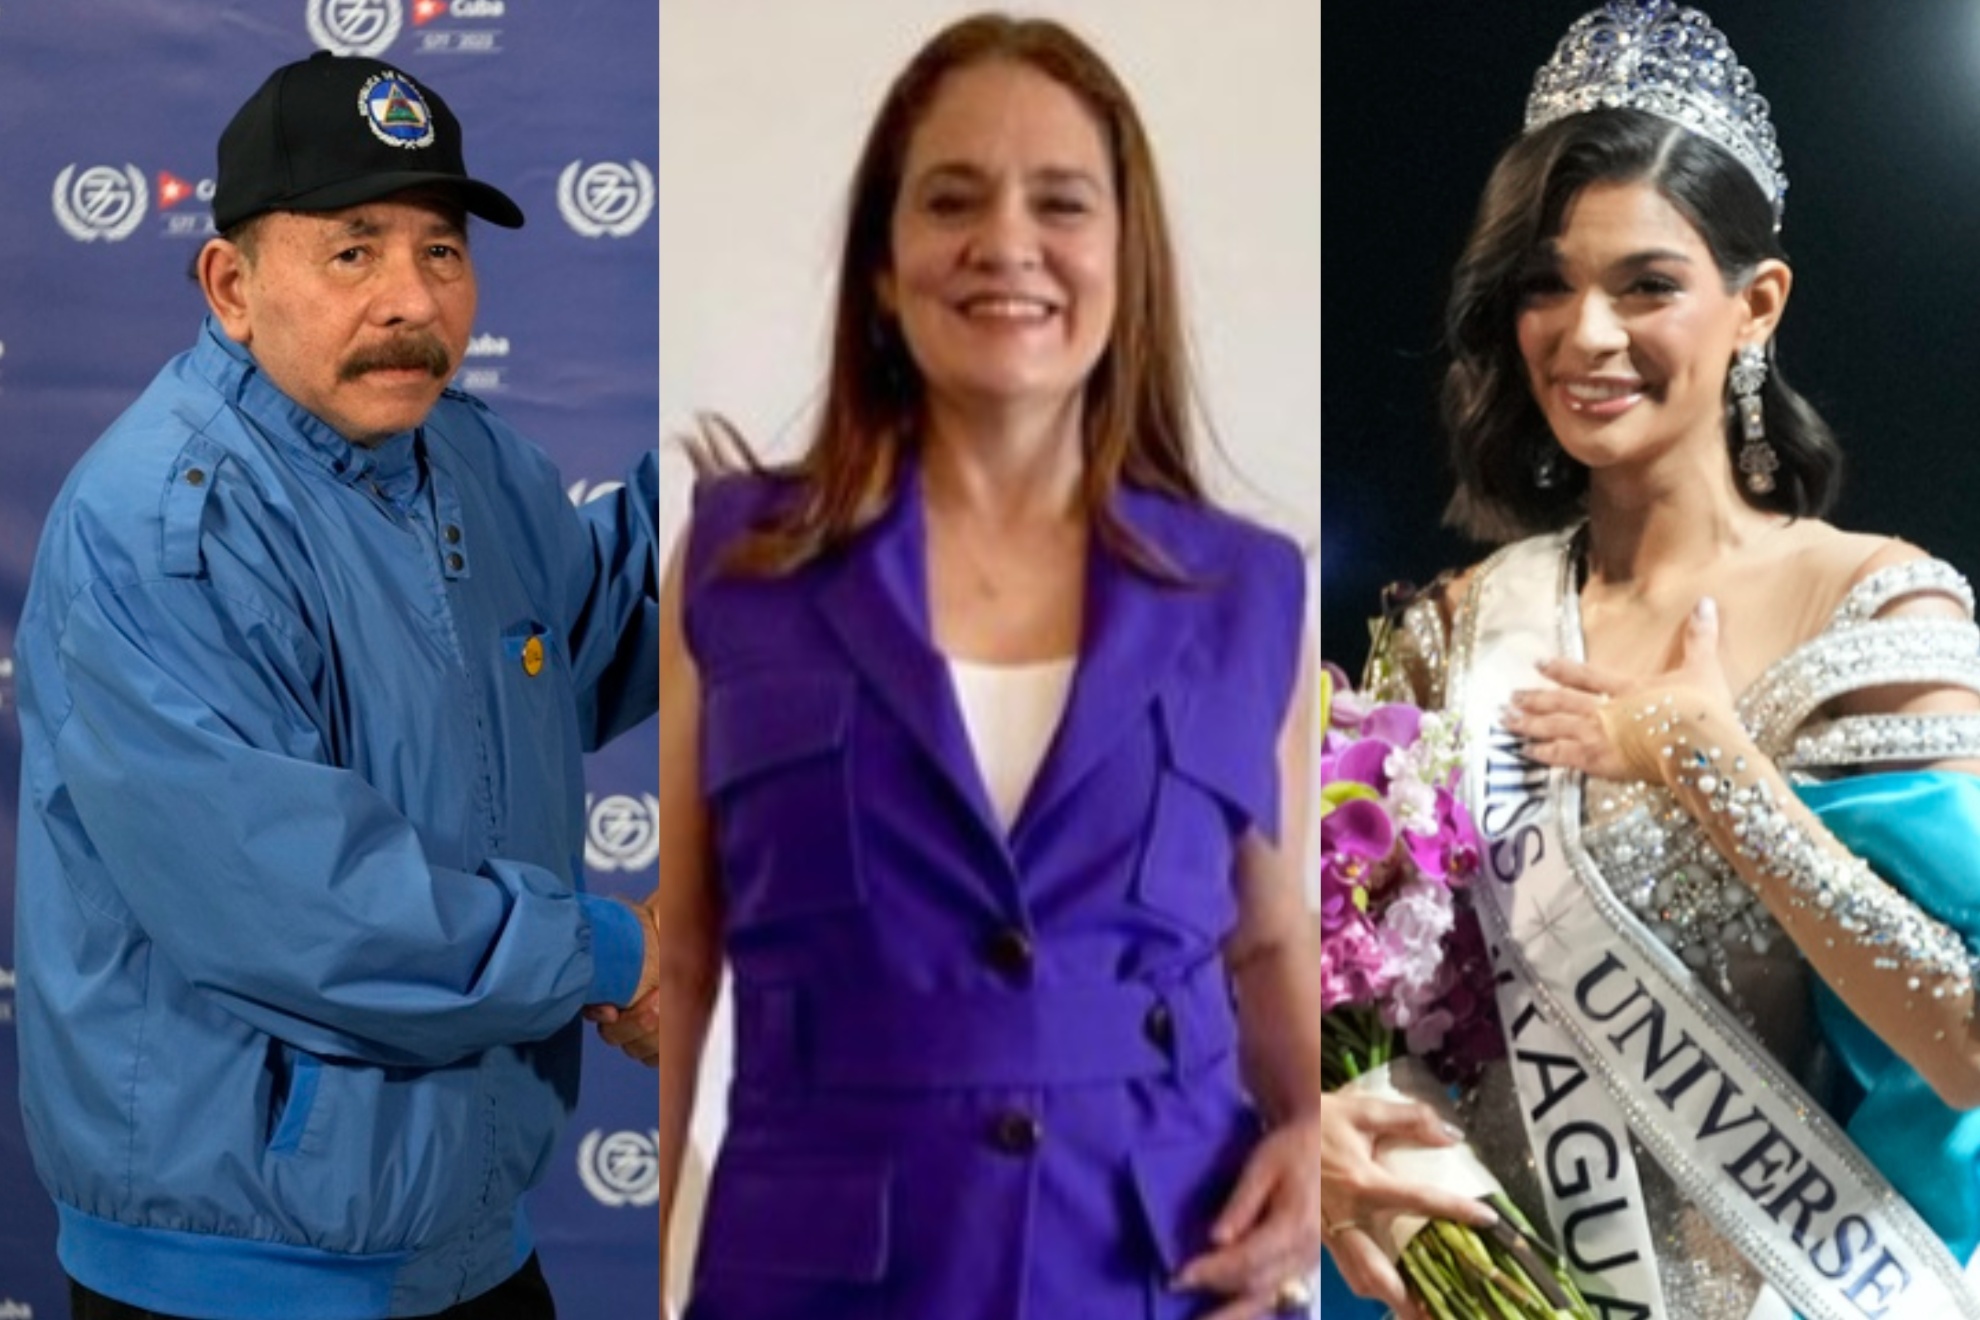 Miss Nicaragua director denied entry into Nicaragua following Miss Universe win